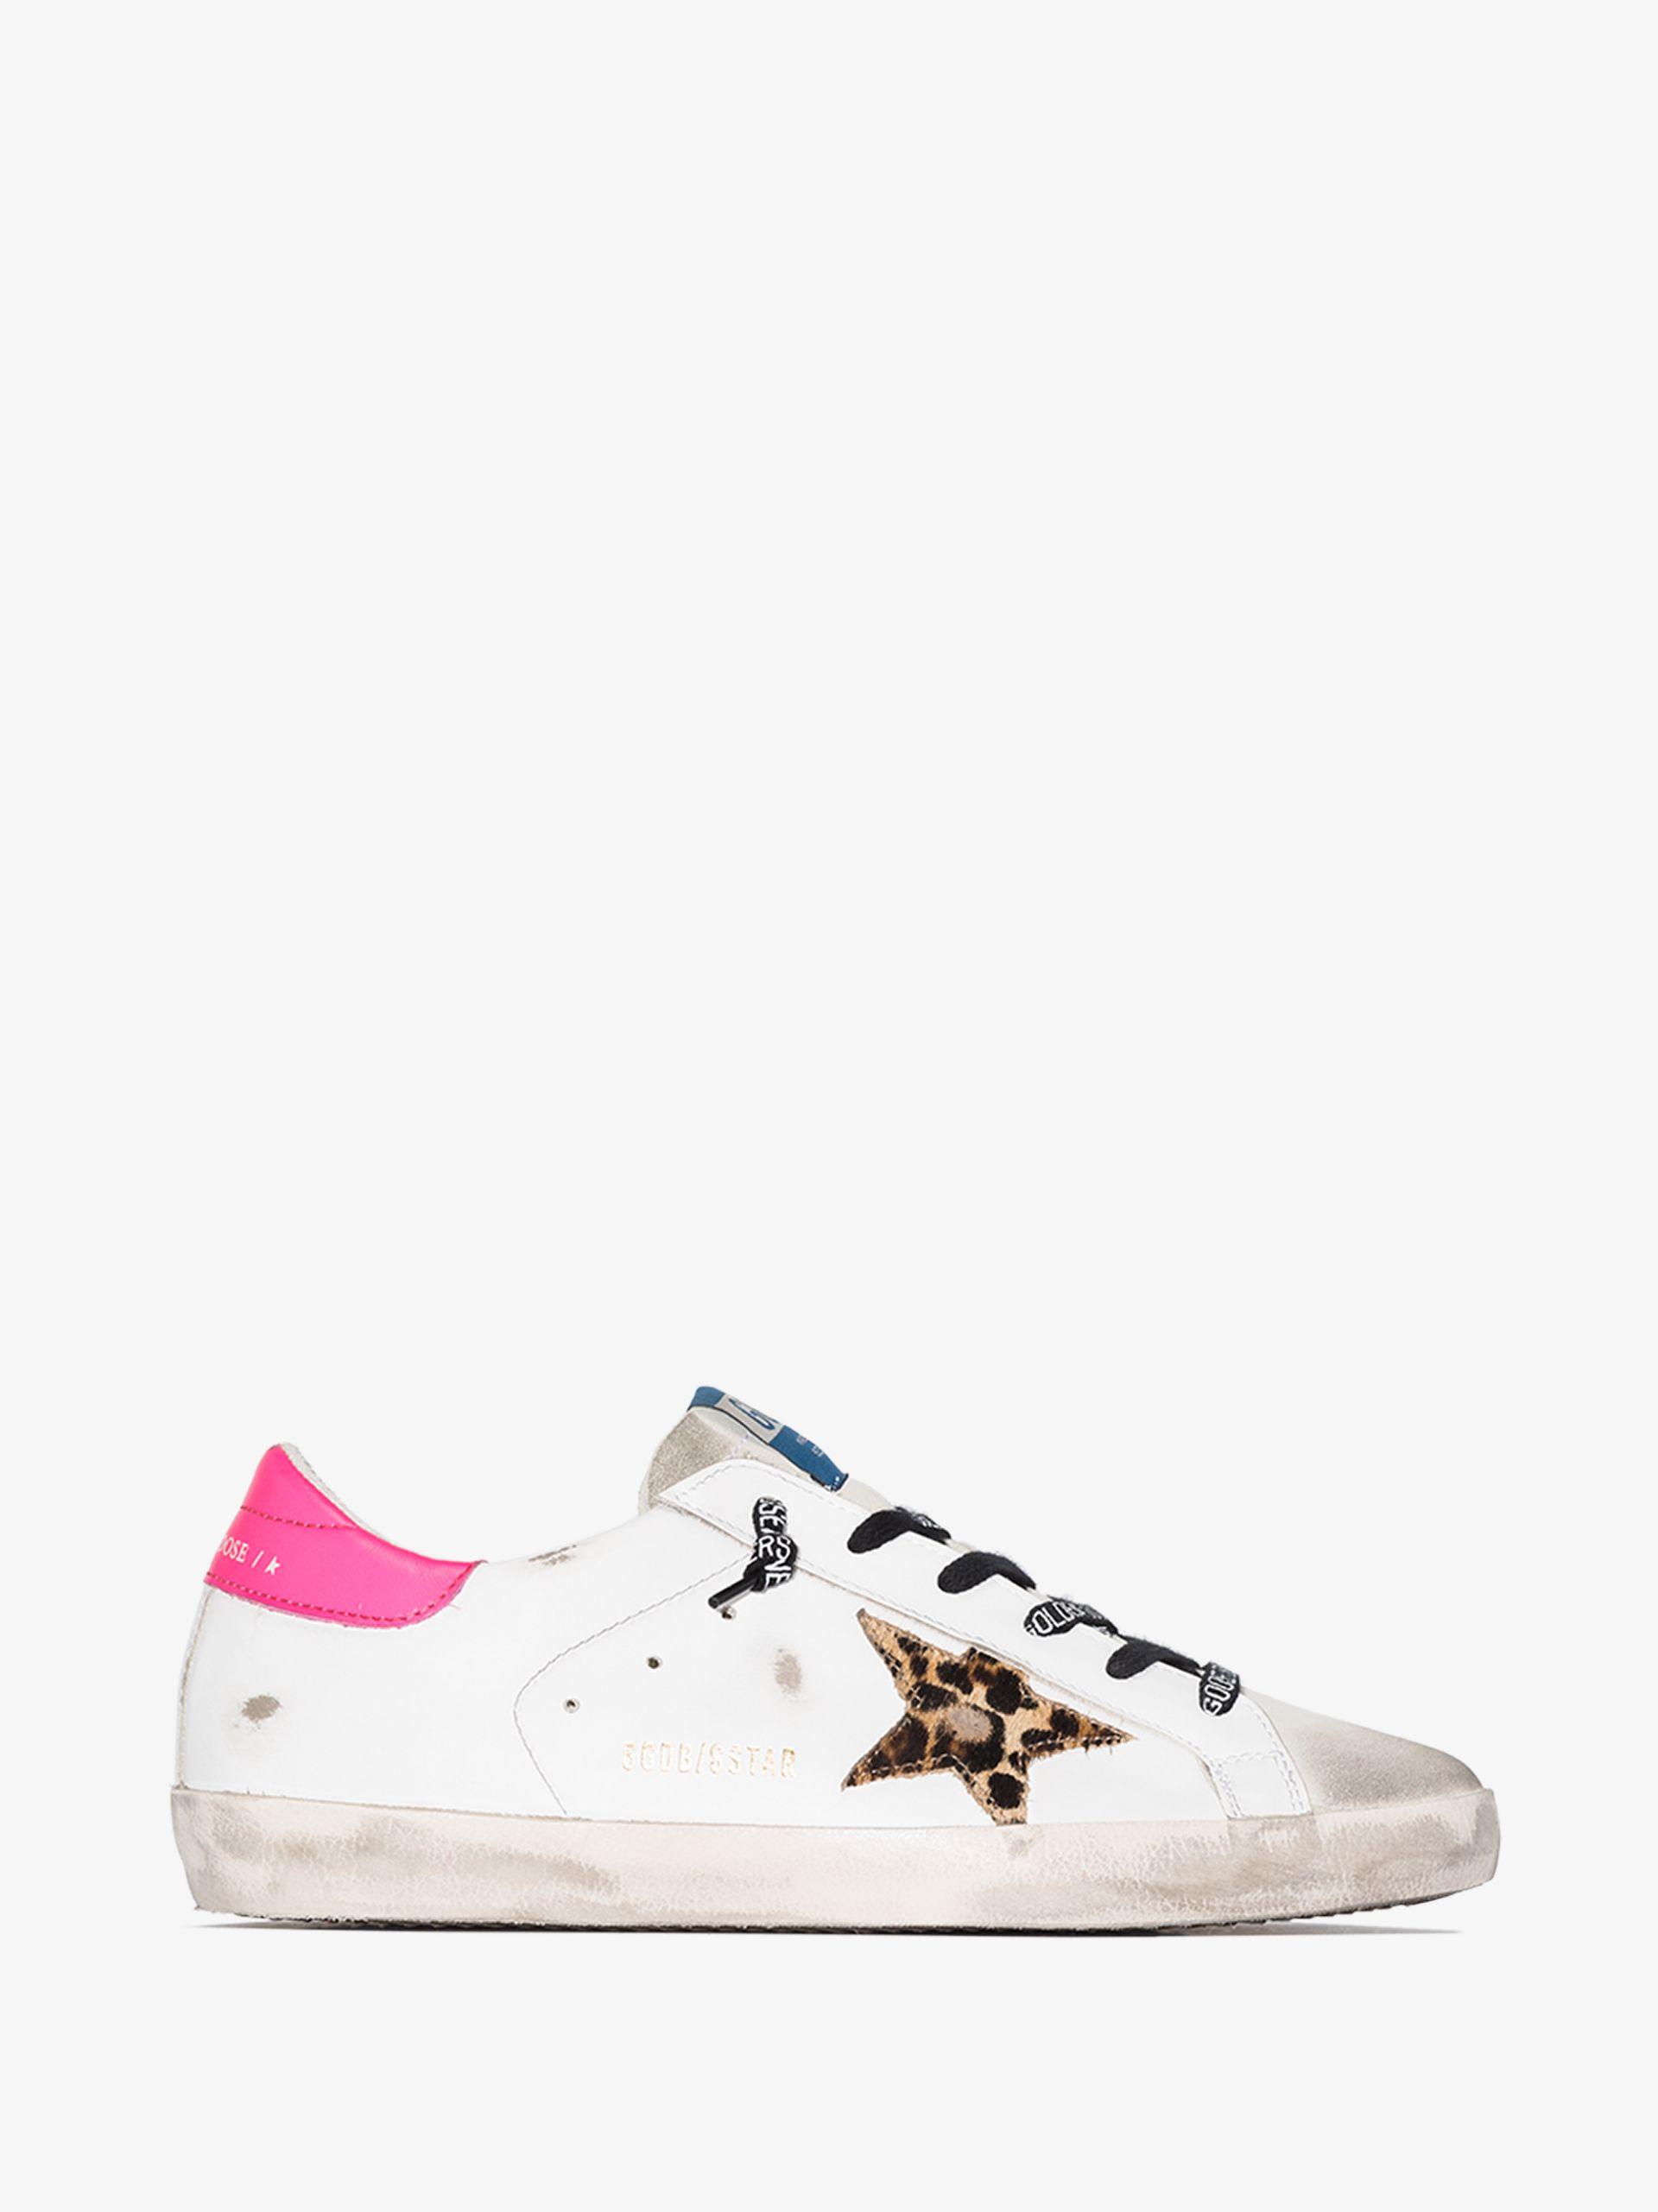 Golden Goose And Pink Super-star Neon Animal Print Sneakers in White | Lyst